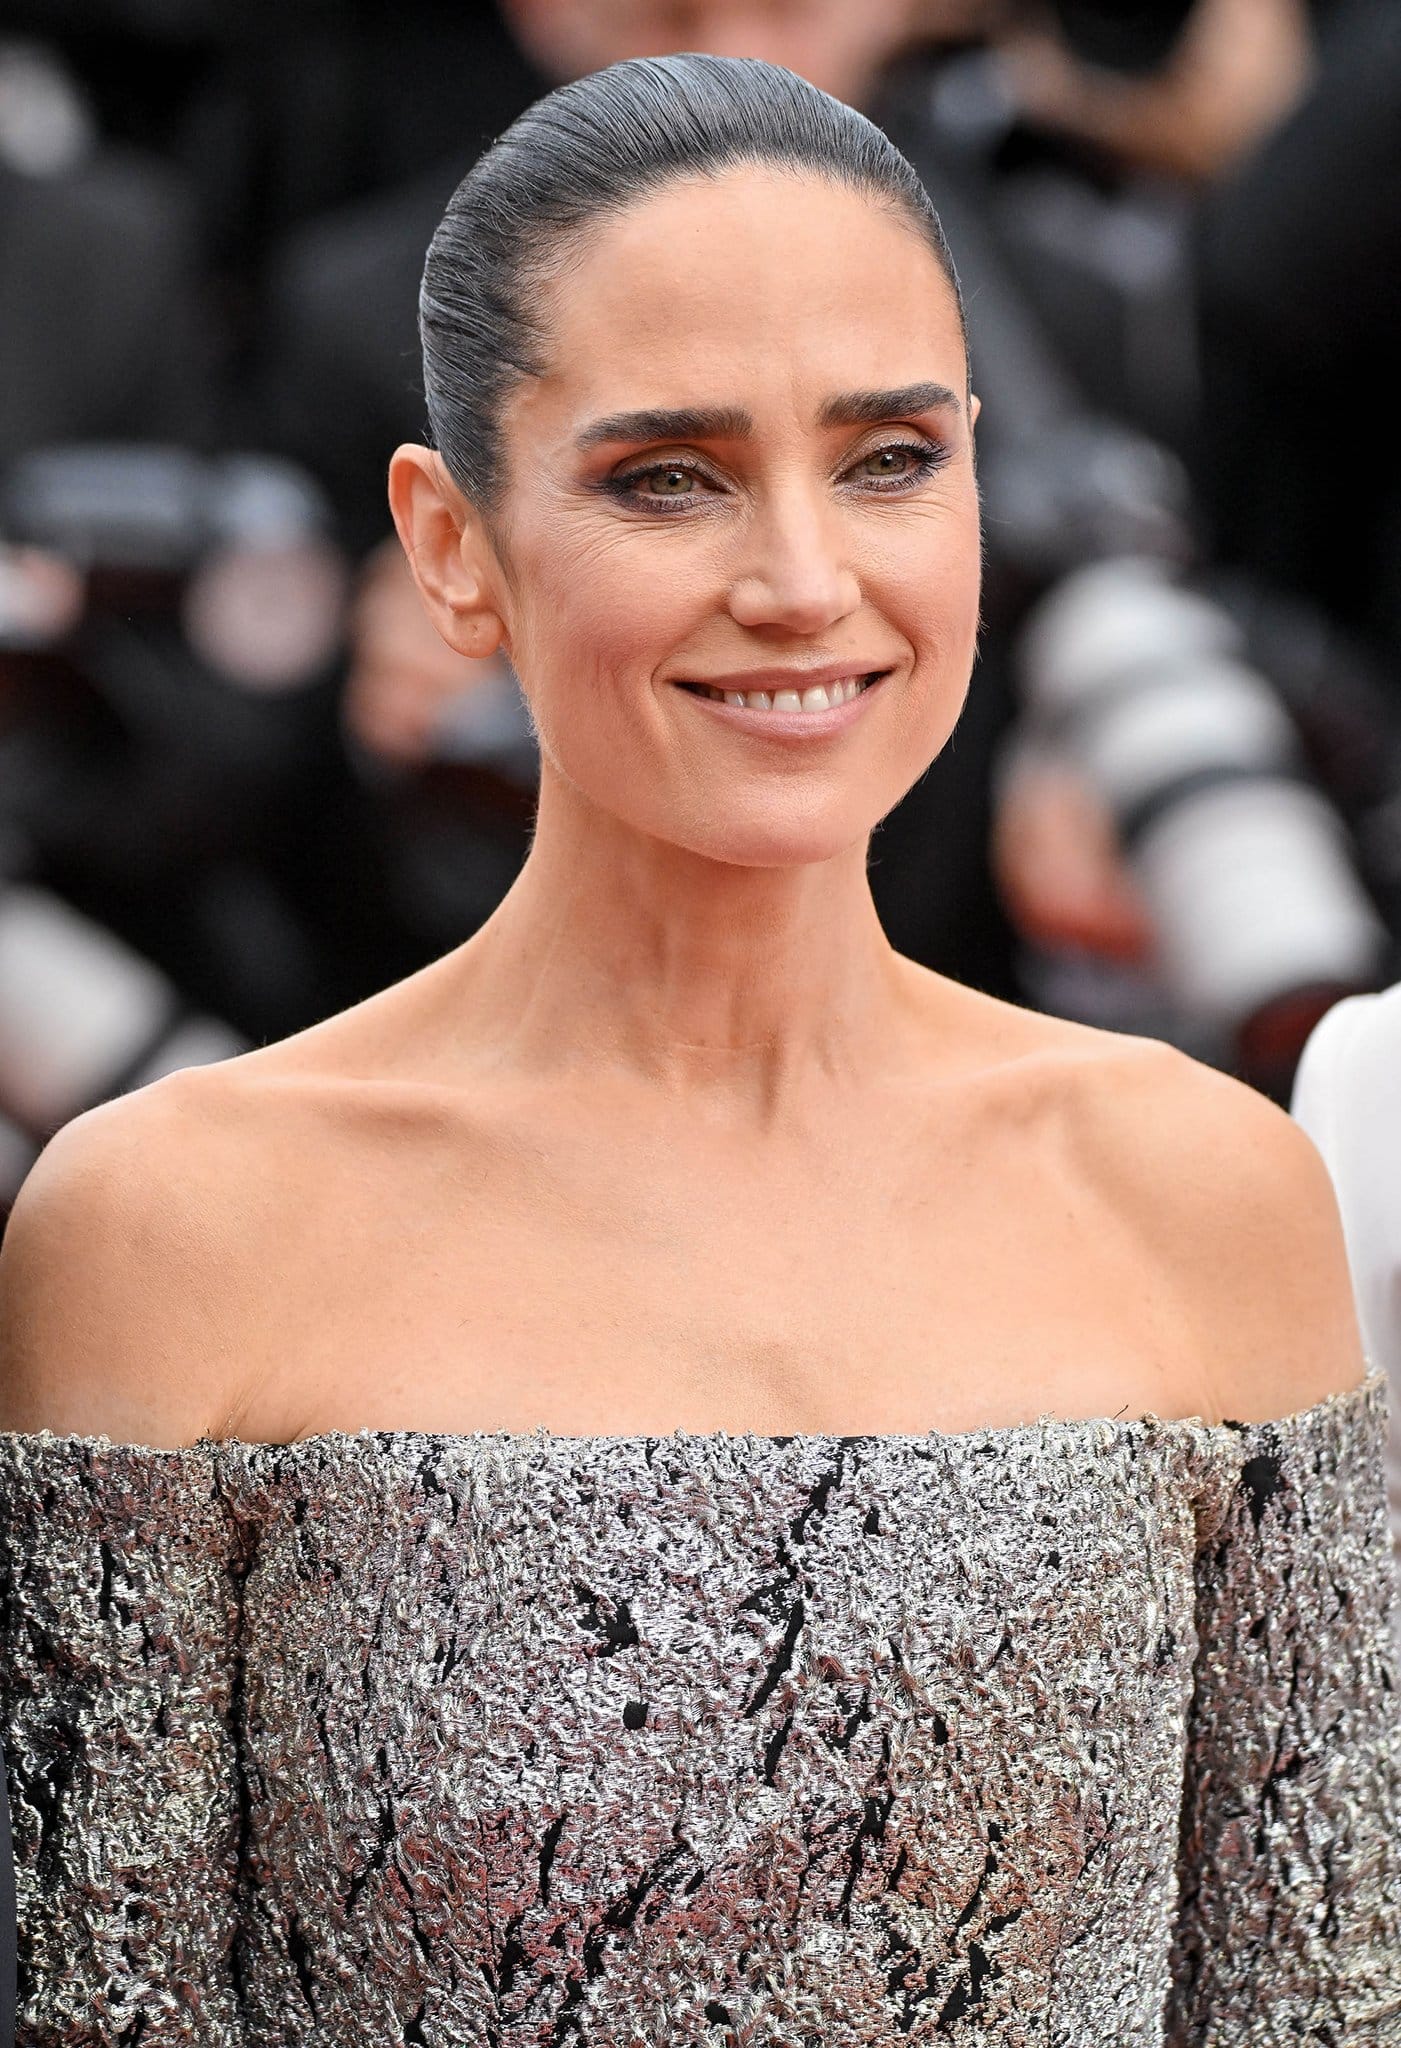 Jennifer Connelly wears a slicked back bun with subtle smokey eyeshadow and nude lipstick